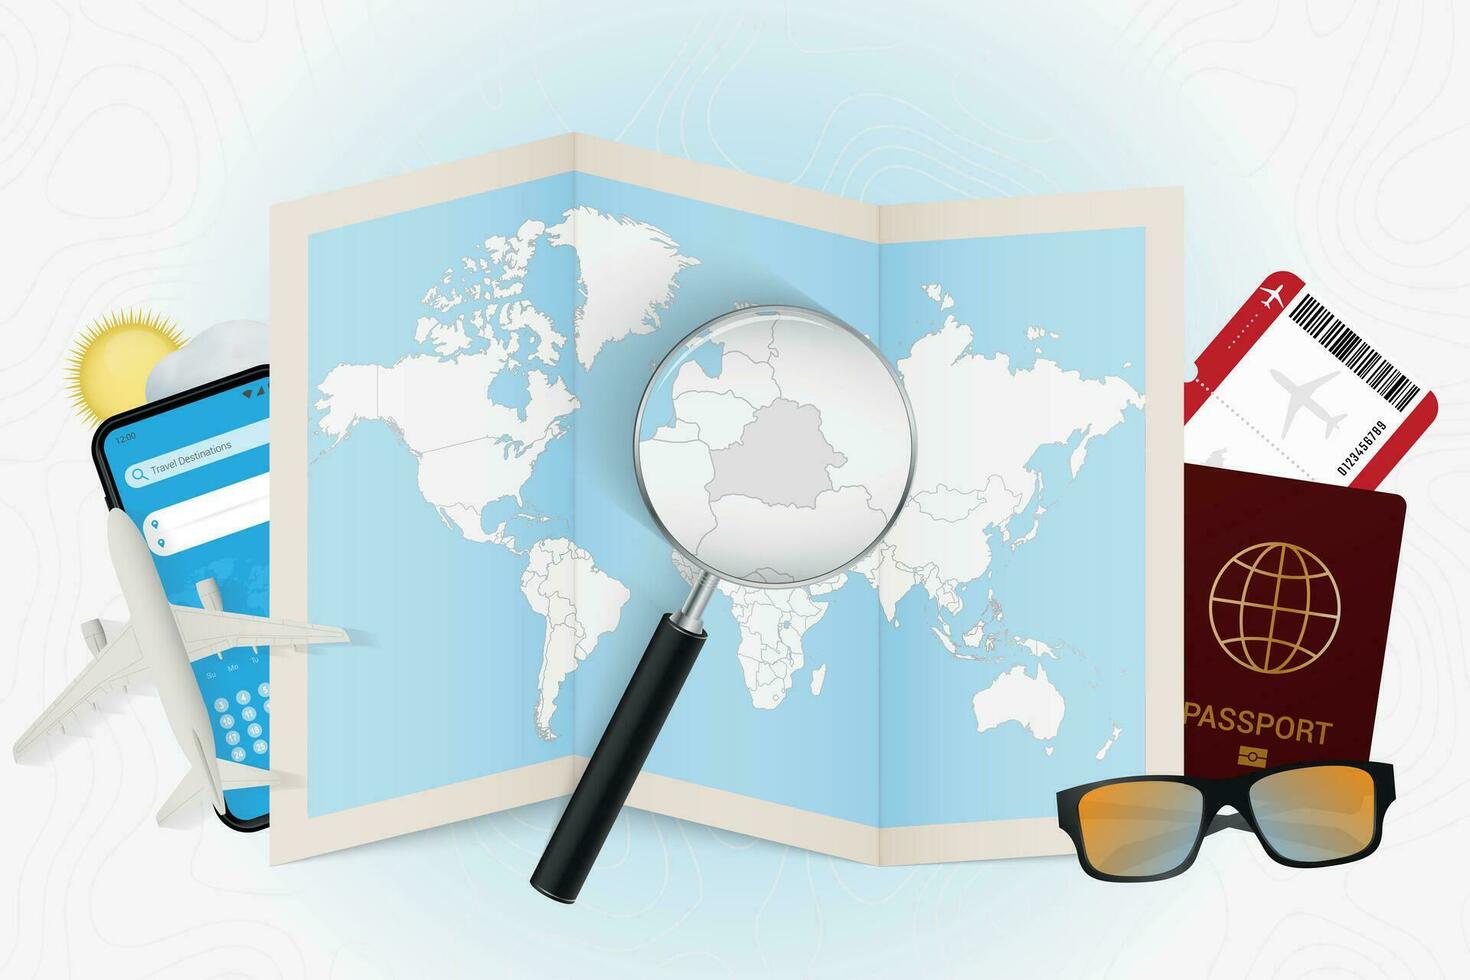 Travel destination Belarus, tourism mockup with travel equipment and world map with magnifying glass on a Belarus. vector